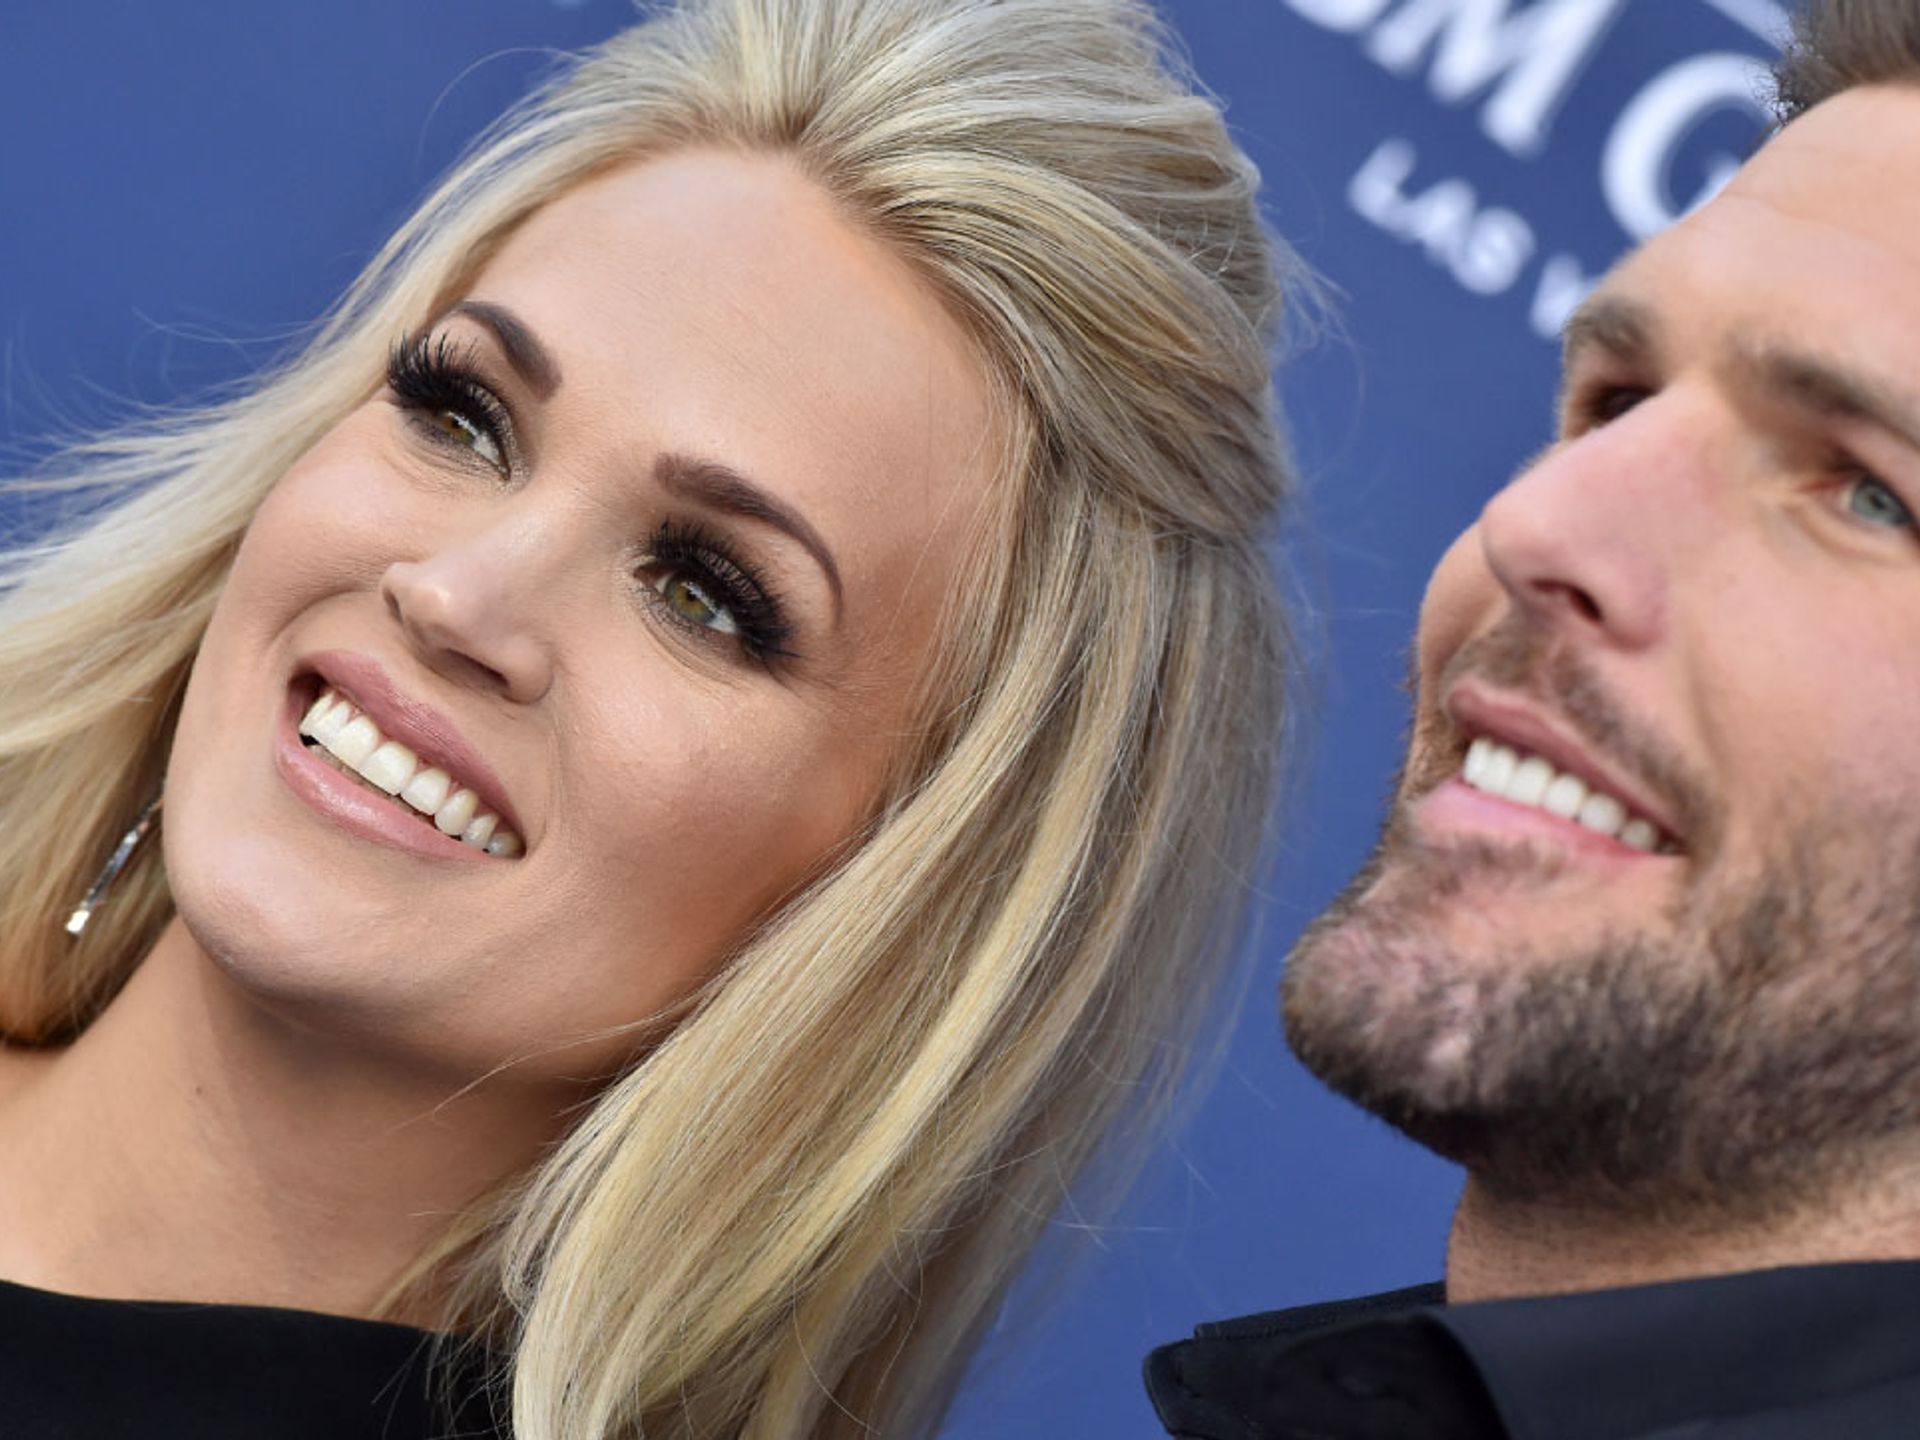 Mike Fisher: Life as a Celebrity Couple Living Out Their Faith